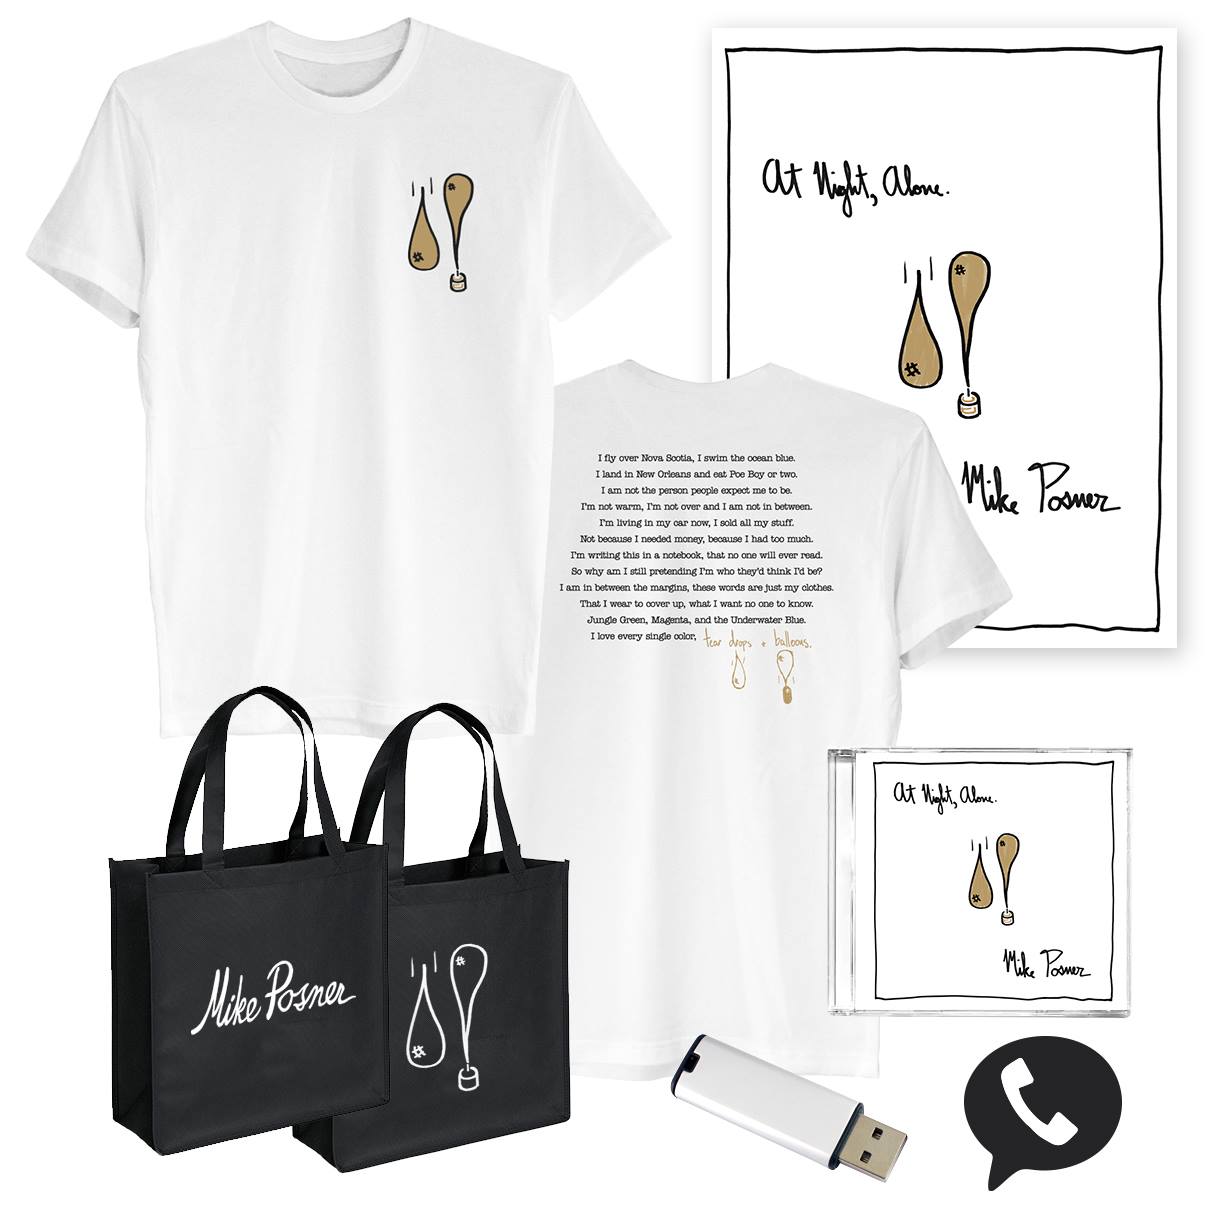 At Night, Alone. Deluxe Bundle - $125.00